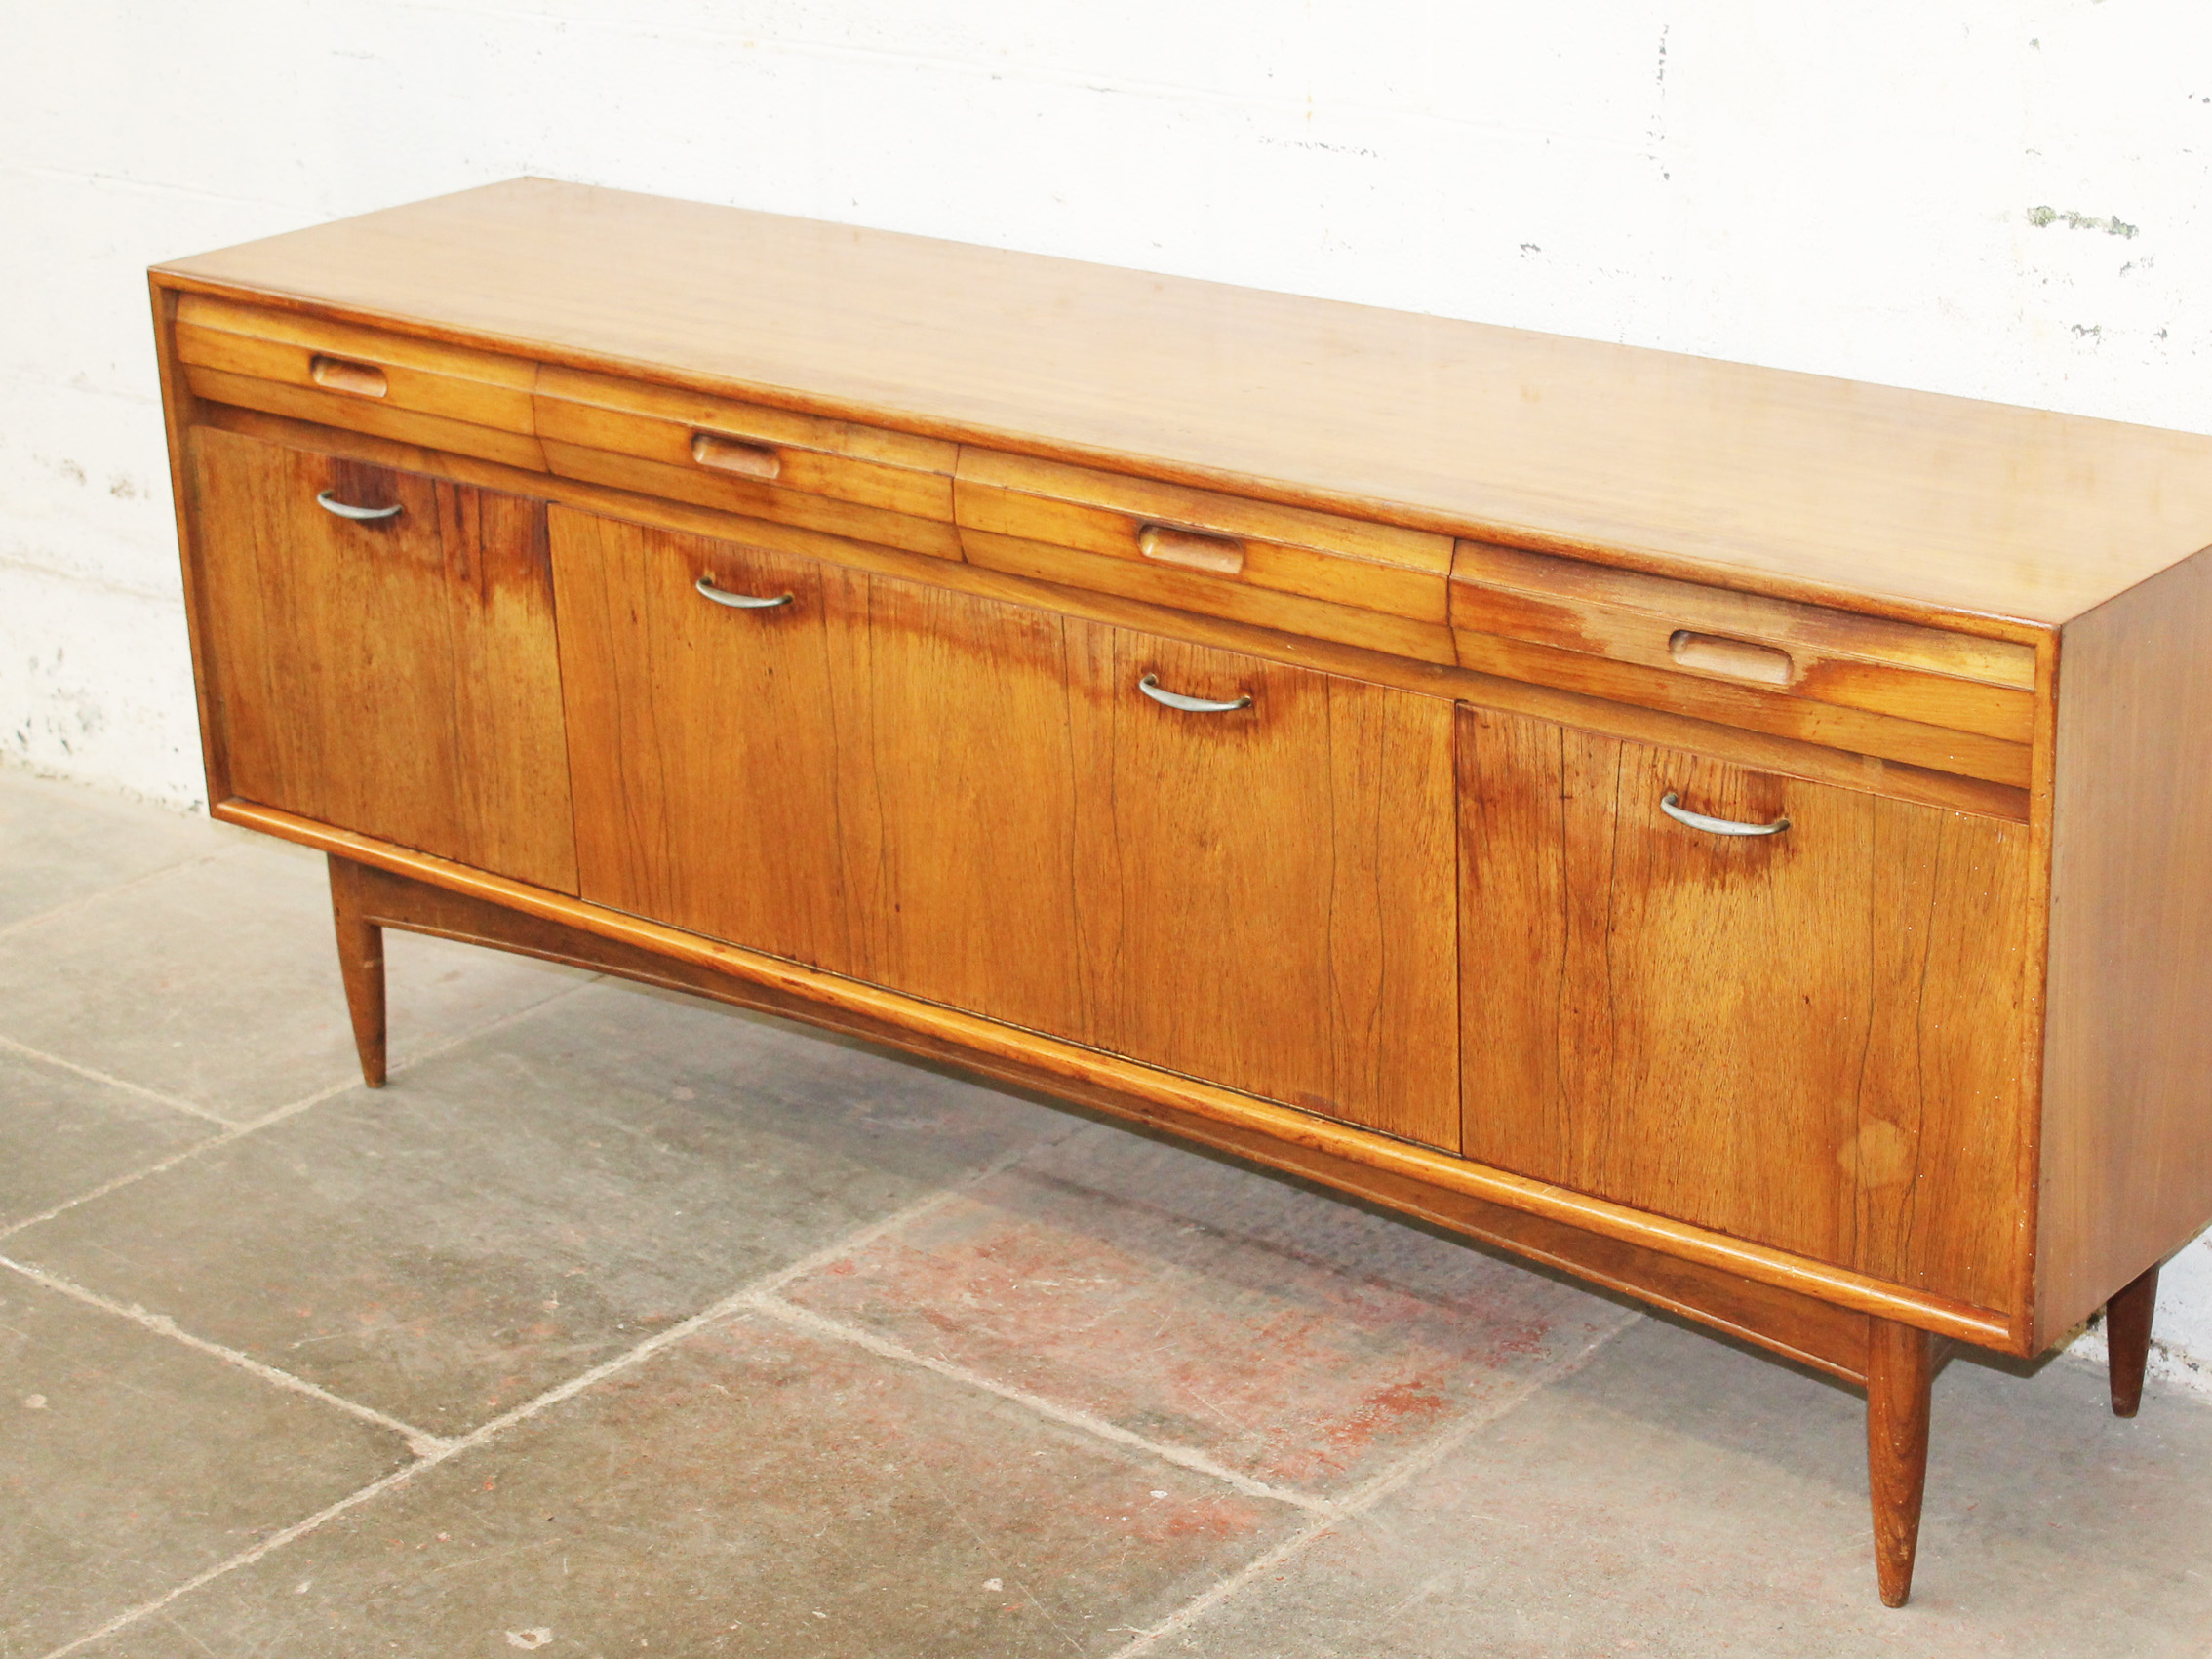 A teak and rosewood sideboard circa 1960. W187cm D47cm H77cm - Image 2 of 2